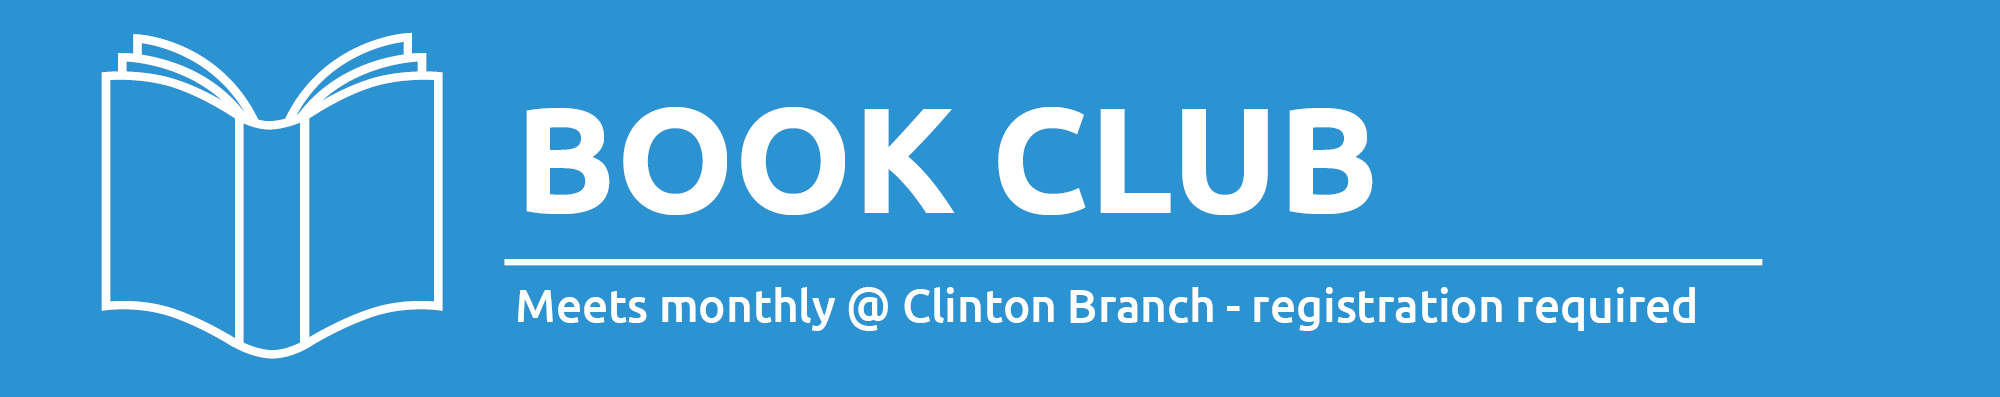 Illustration of a book with text promoting Clinton Book Club